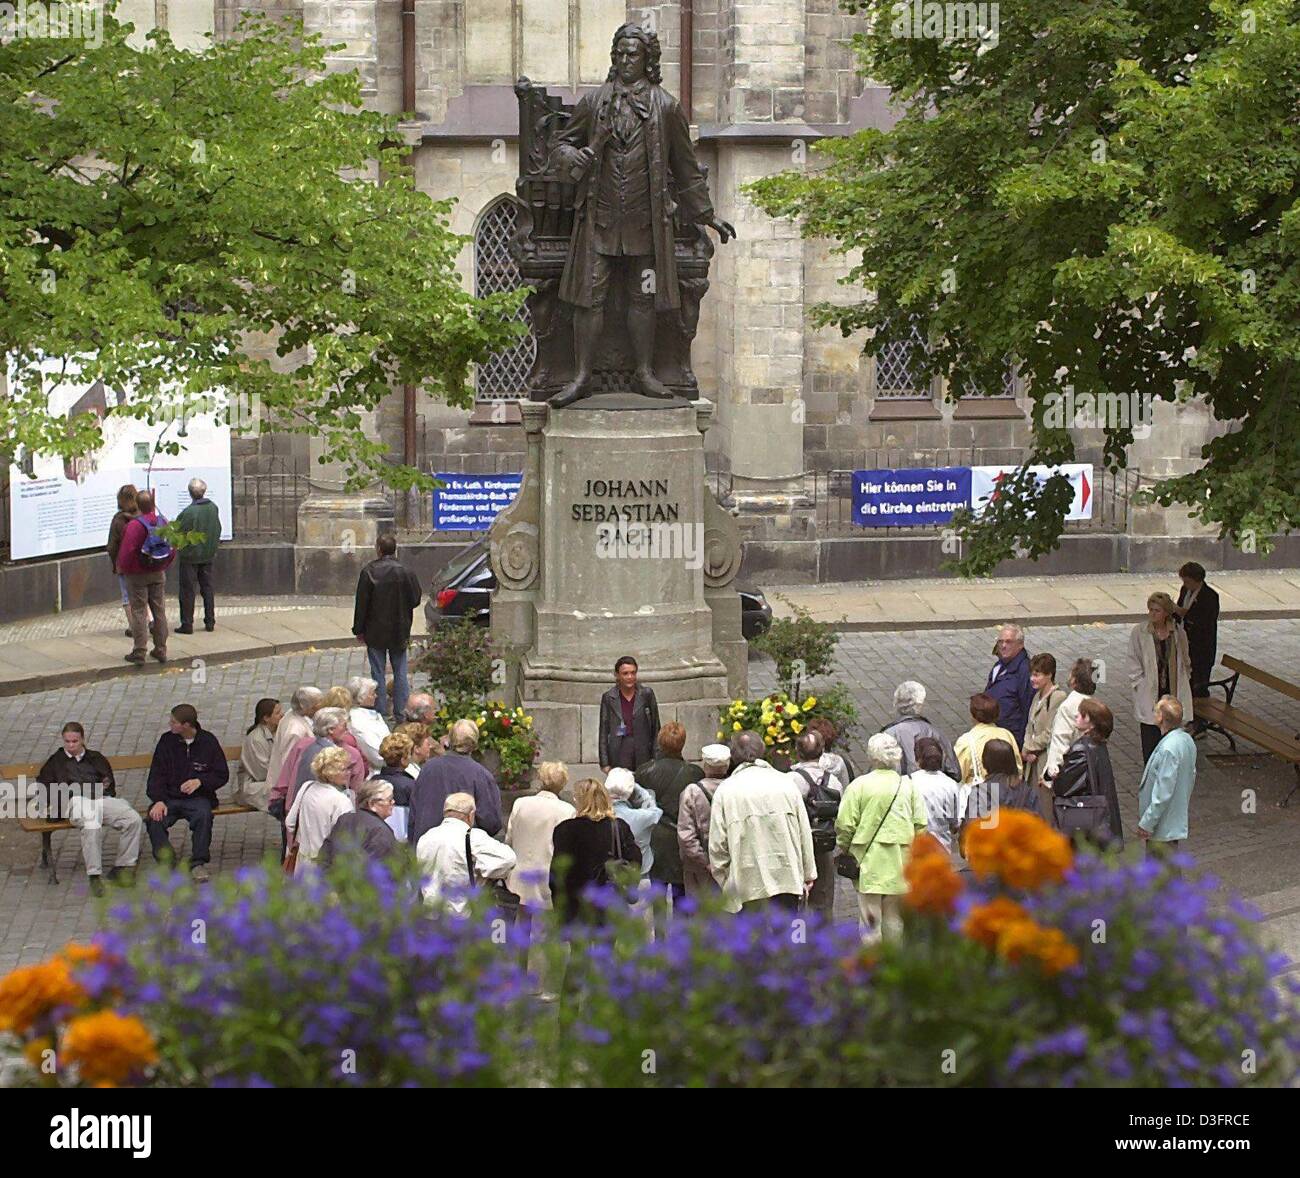 (dpa files) - Tourists look at the statue of German composer Johann Sebastian Bach in front of the St Thomas Church in Leipzig, eastern Germany, 20 July 2000. The statue was created in 1908 by Carl Seffner. Born on 21 March 1685 in the village of Eisenach to a musical family, Bach had his first major appointment in 1708 as organist at the ducal court at Weimar. This was followed by Stock Photo